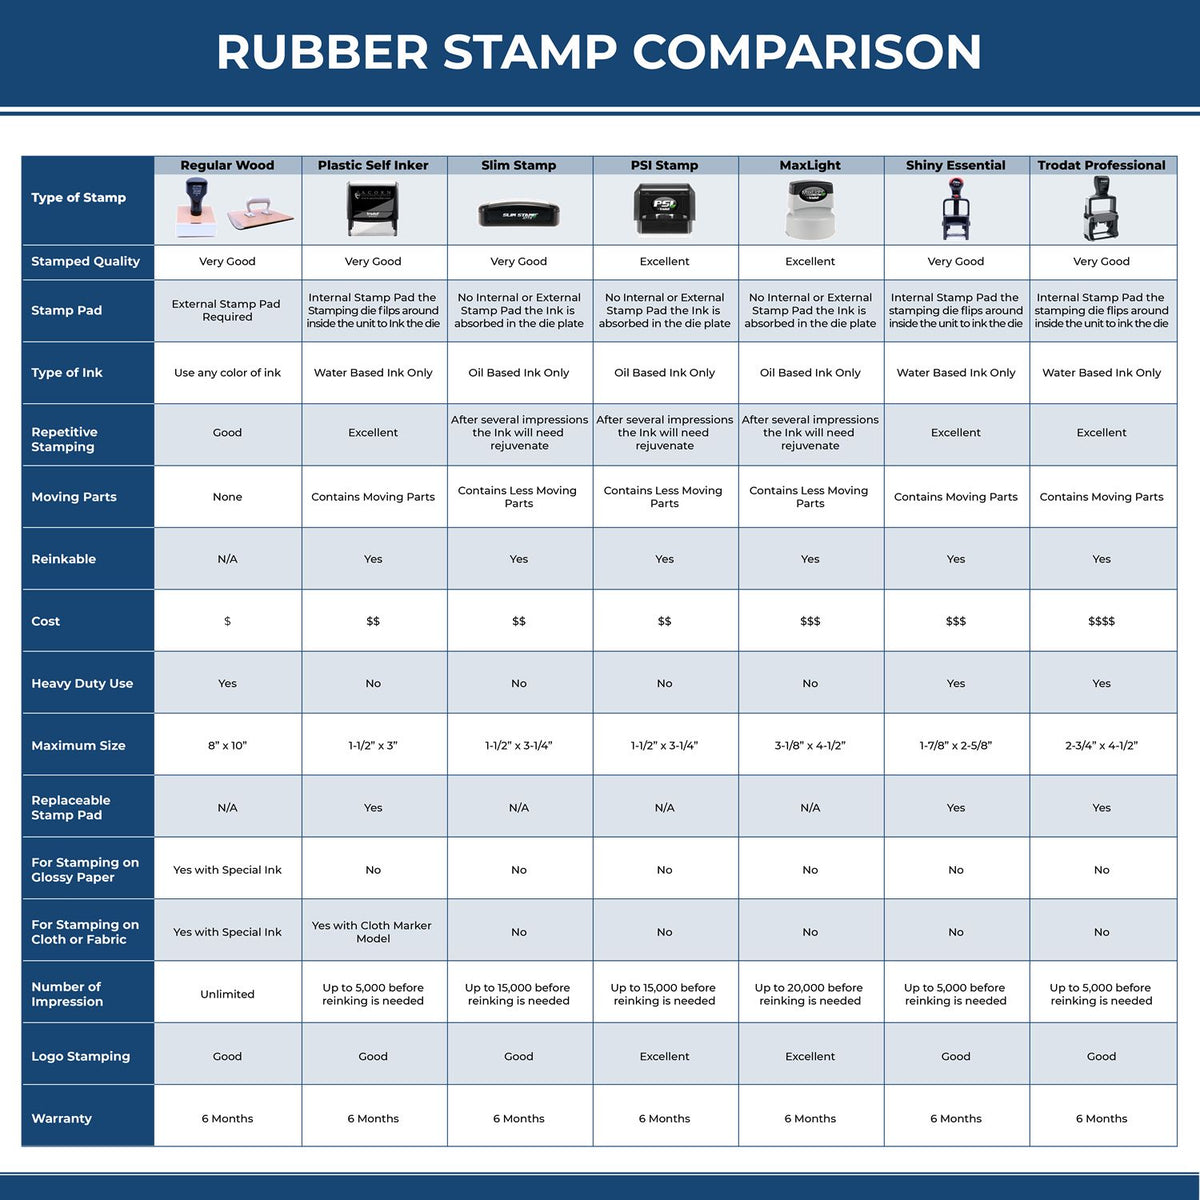 Large E-mailed with Date Box Rubber Stamp 4847R Rubber Stamp Comparison